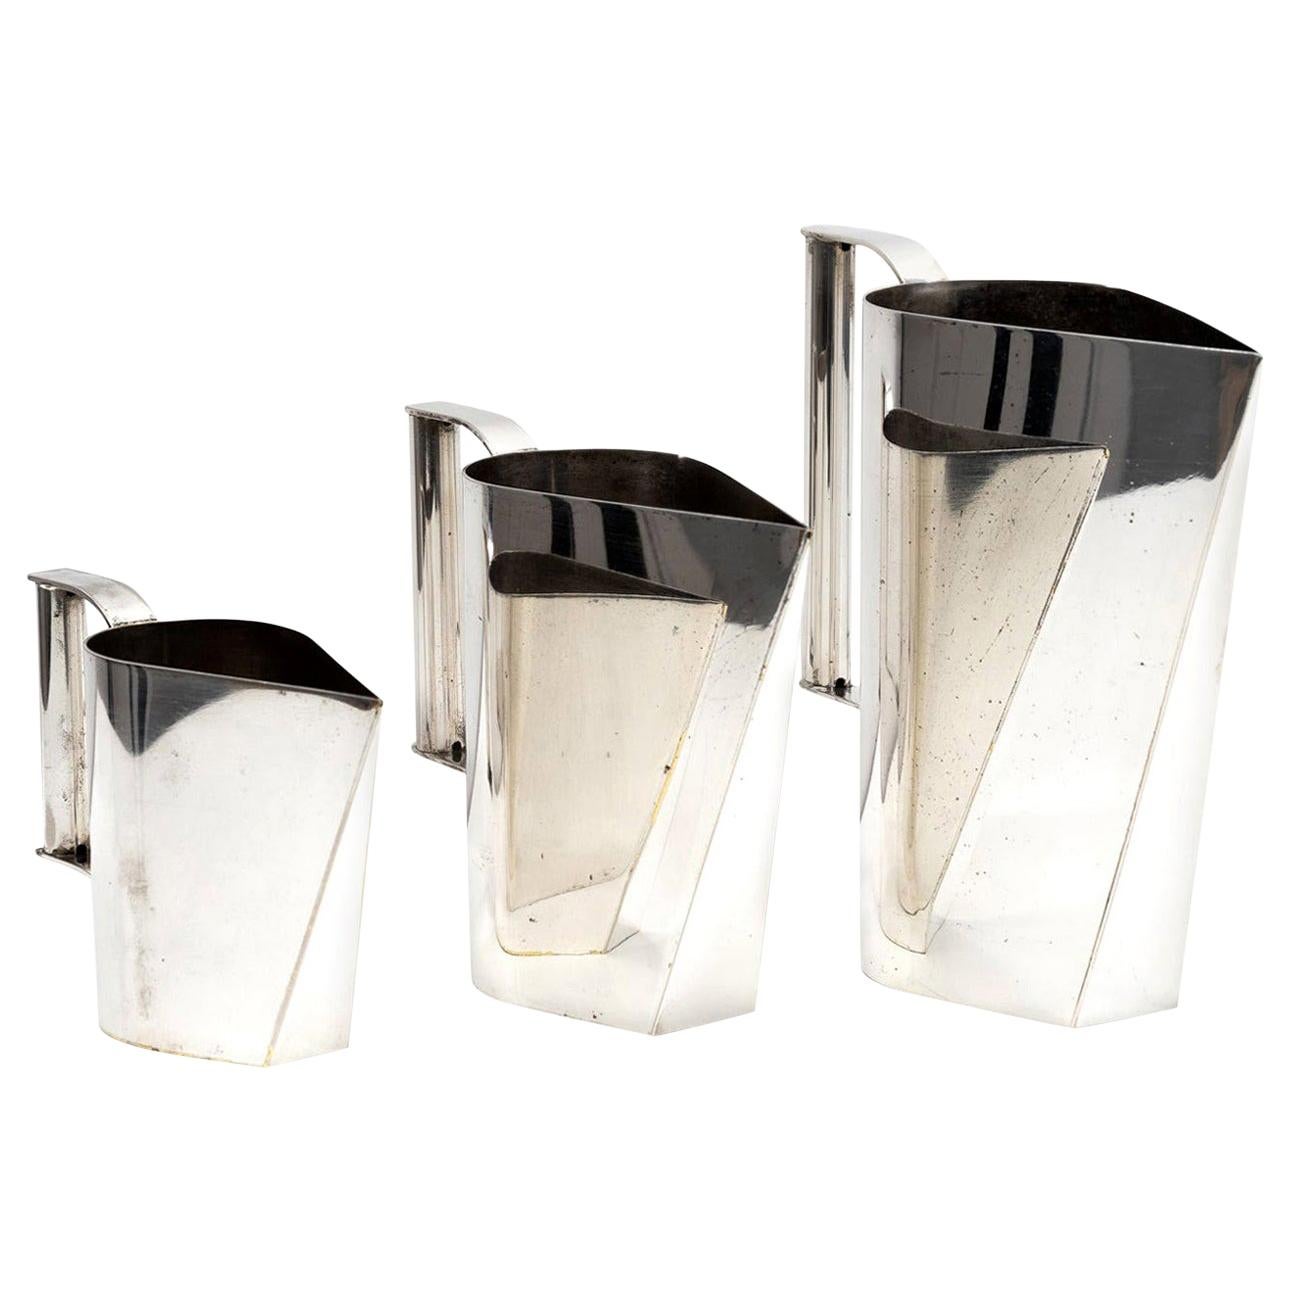 Set of 3 Silver Plated Modernist Pitchers Attributed to Cini Boeri, circa 1975 For Sale